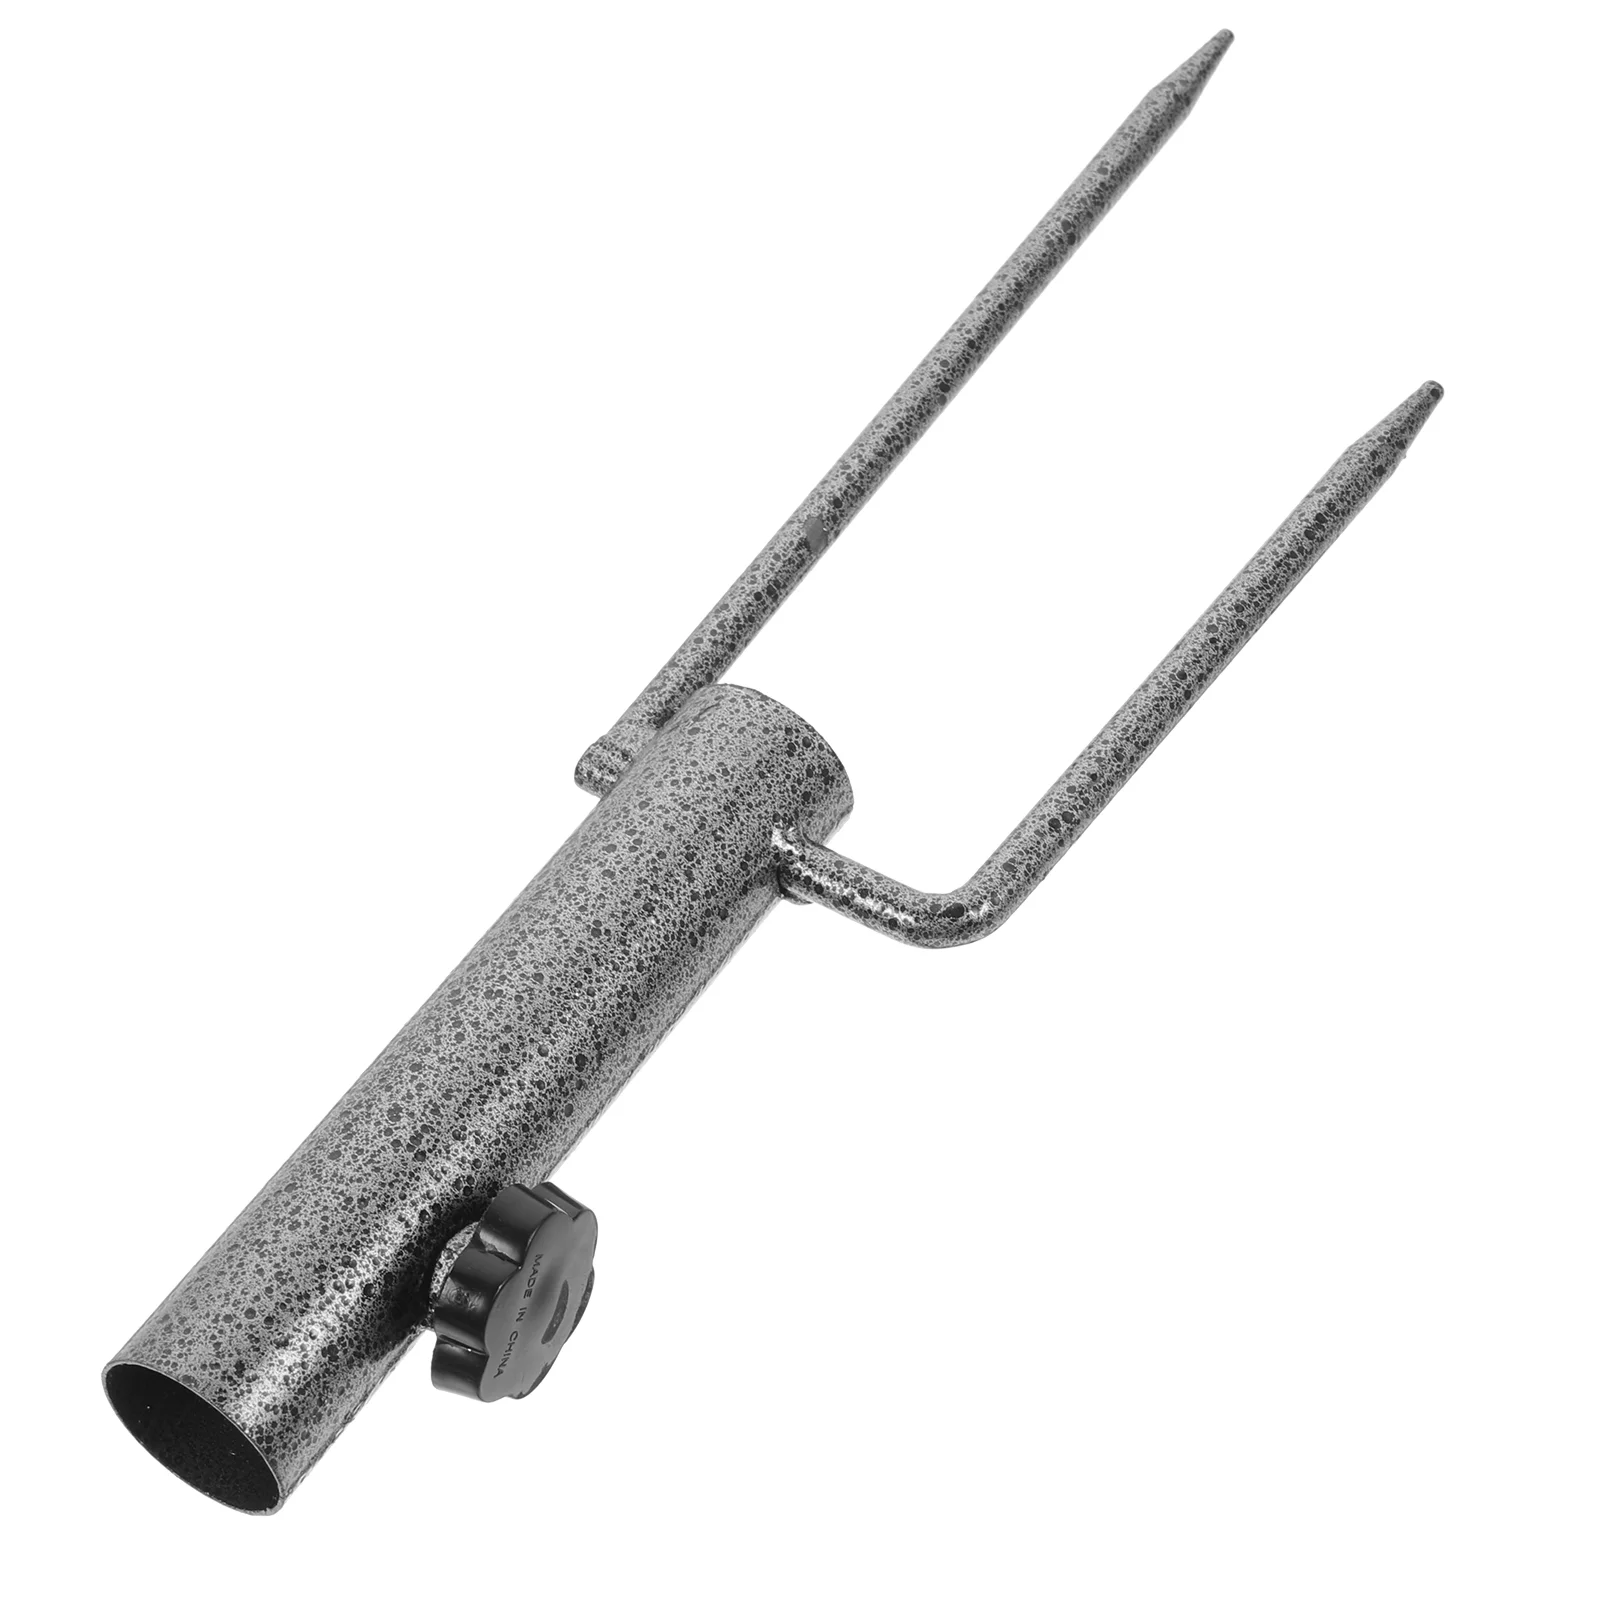 

Patio Metal Anchor Beach Heavy Duty Ground Grass Auger Holder Stands with Two Forks for Use in Soil